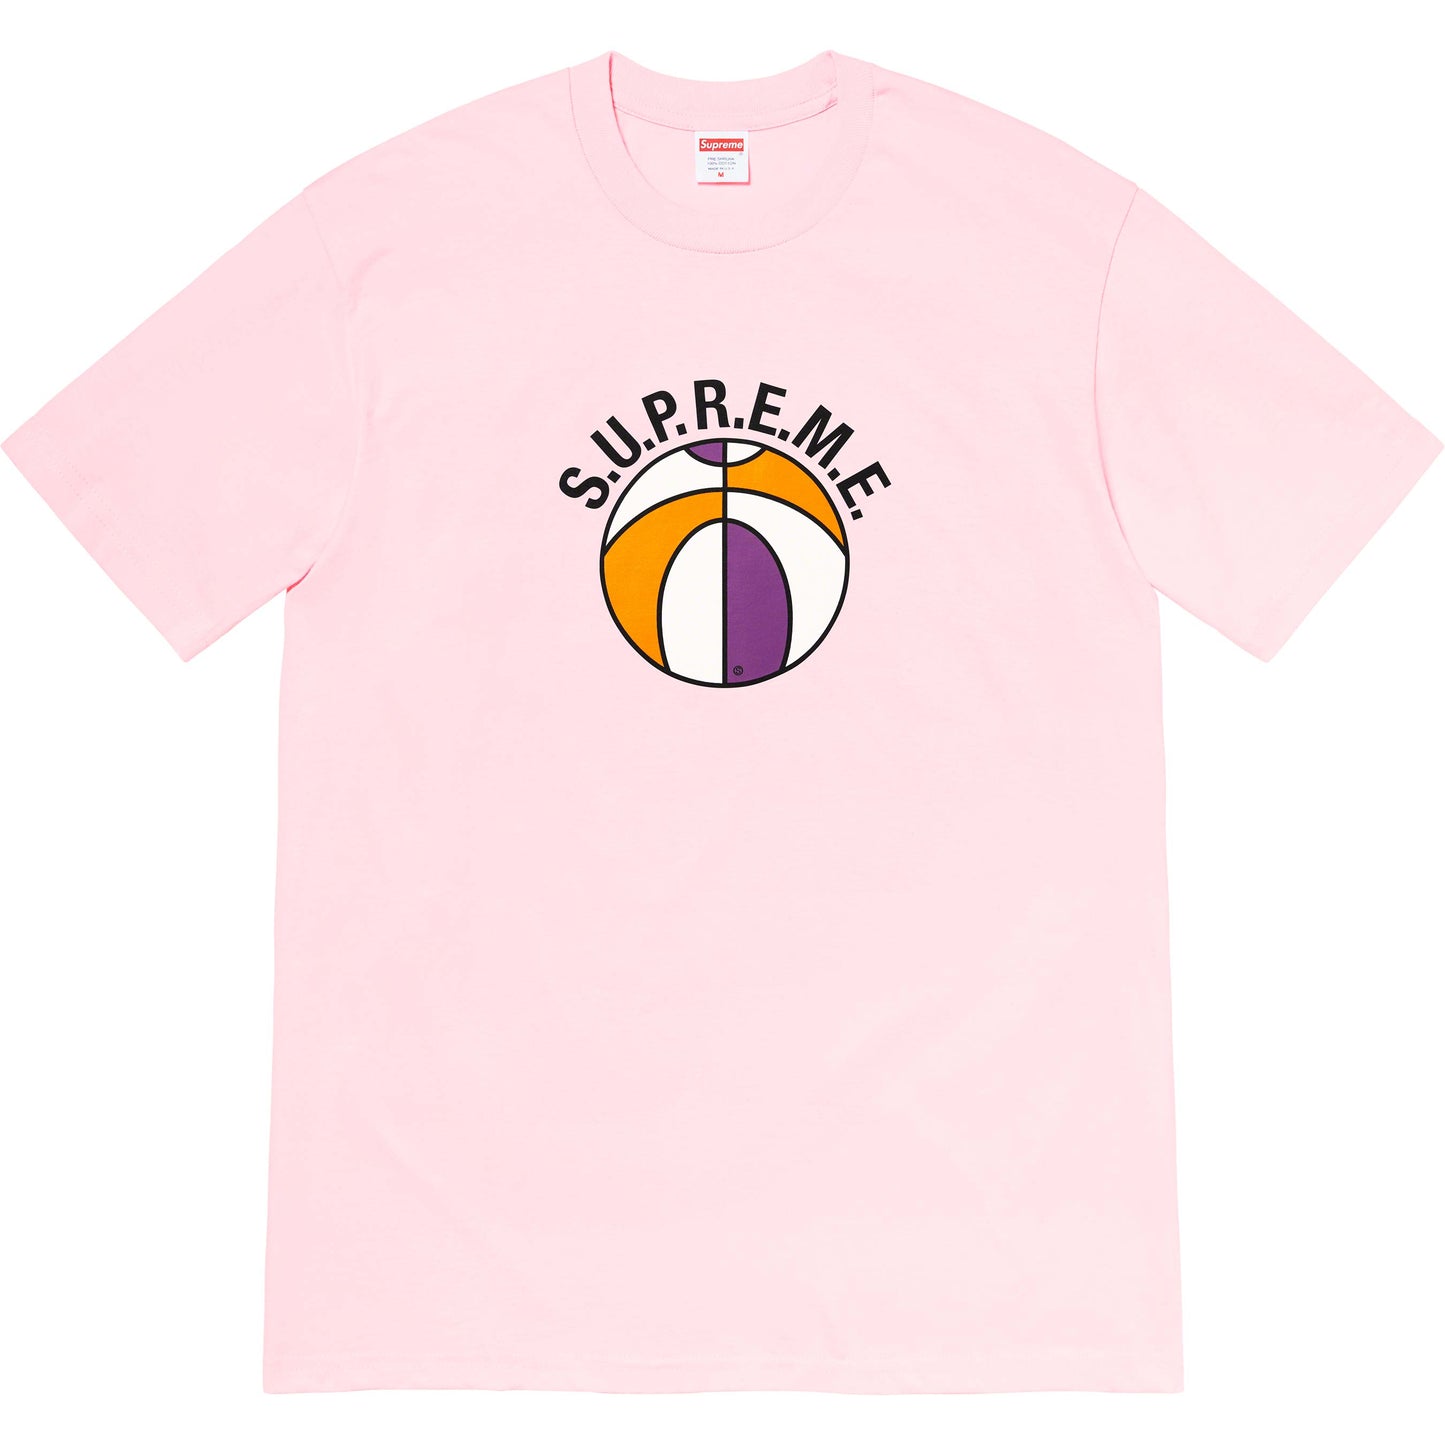 Supreme League Tee Light Pink from Supreme